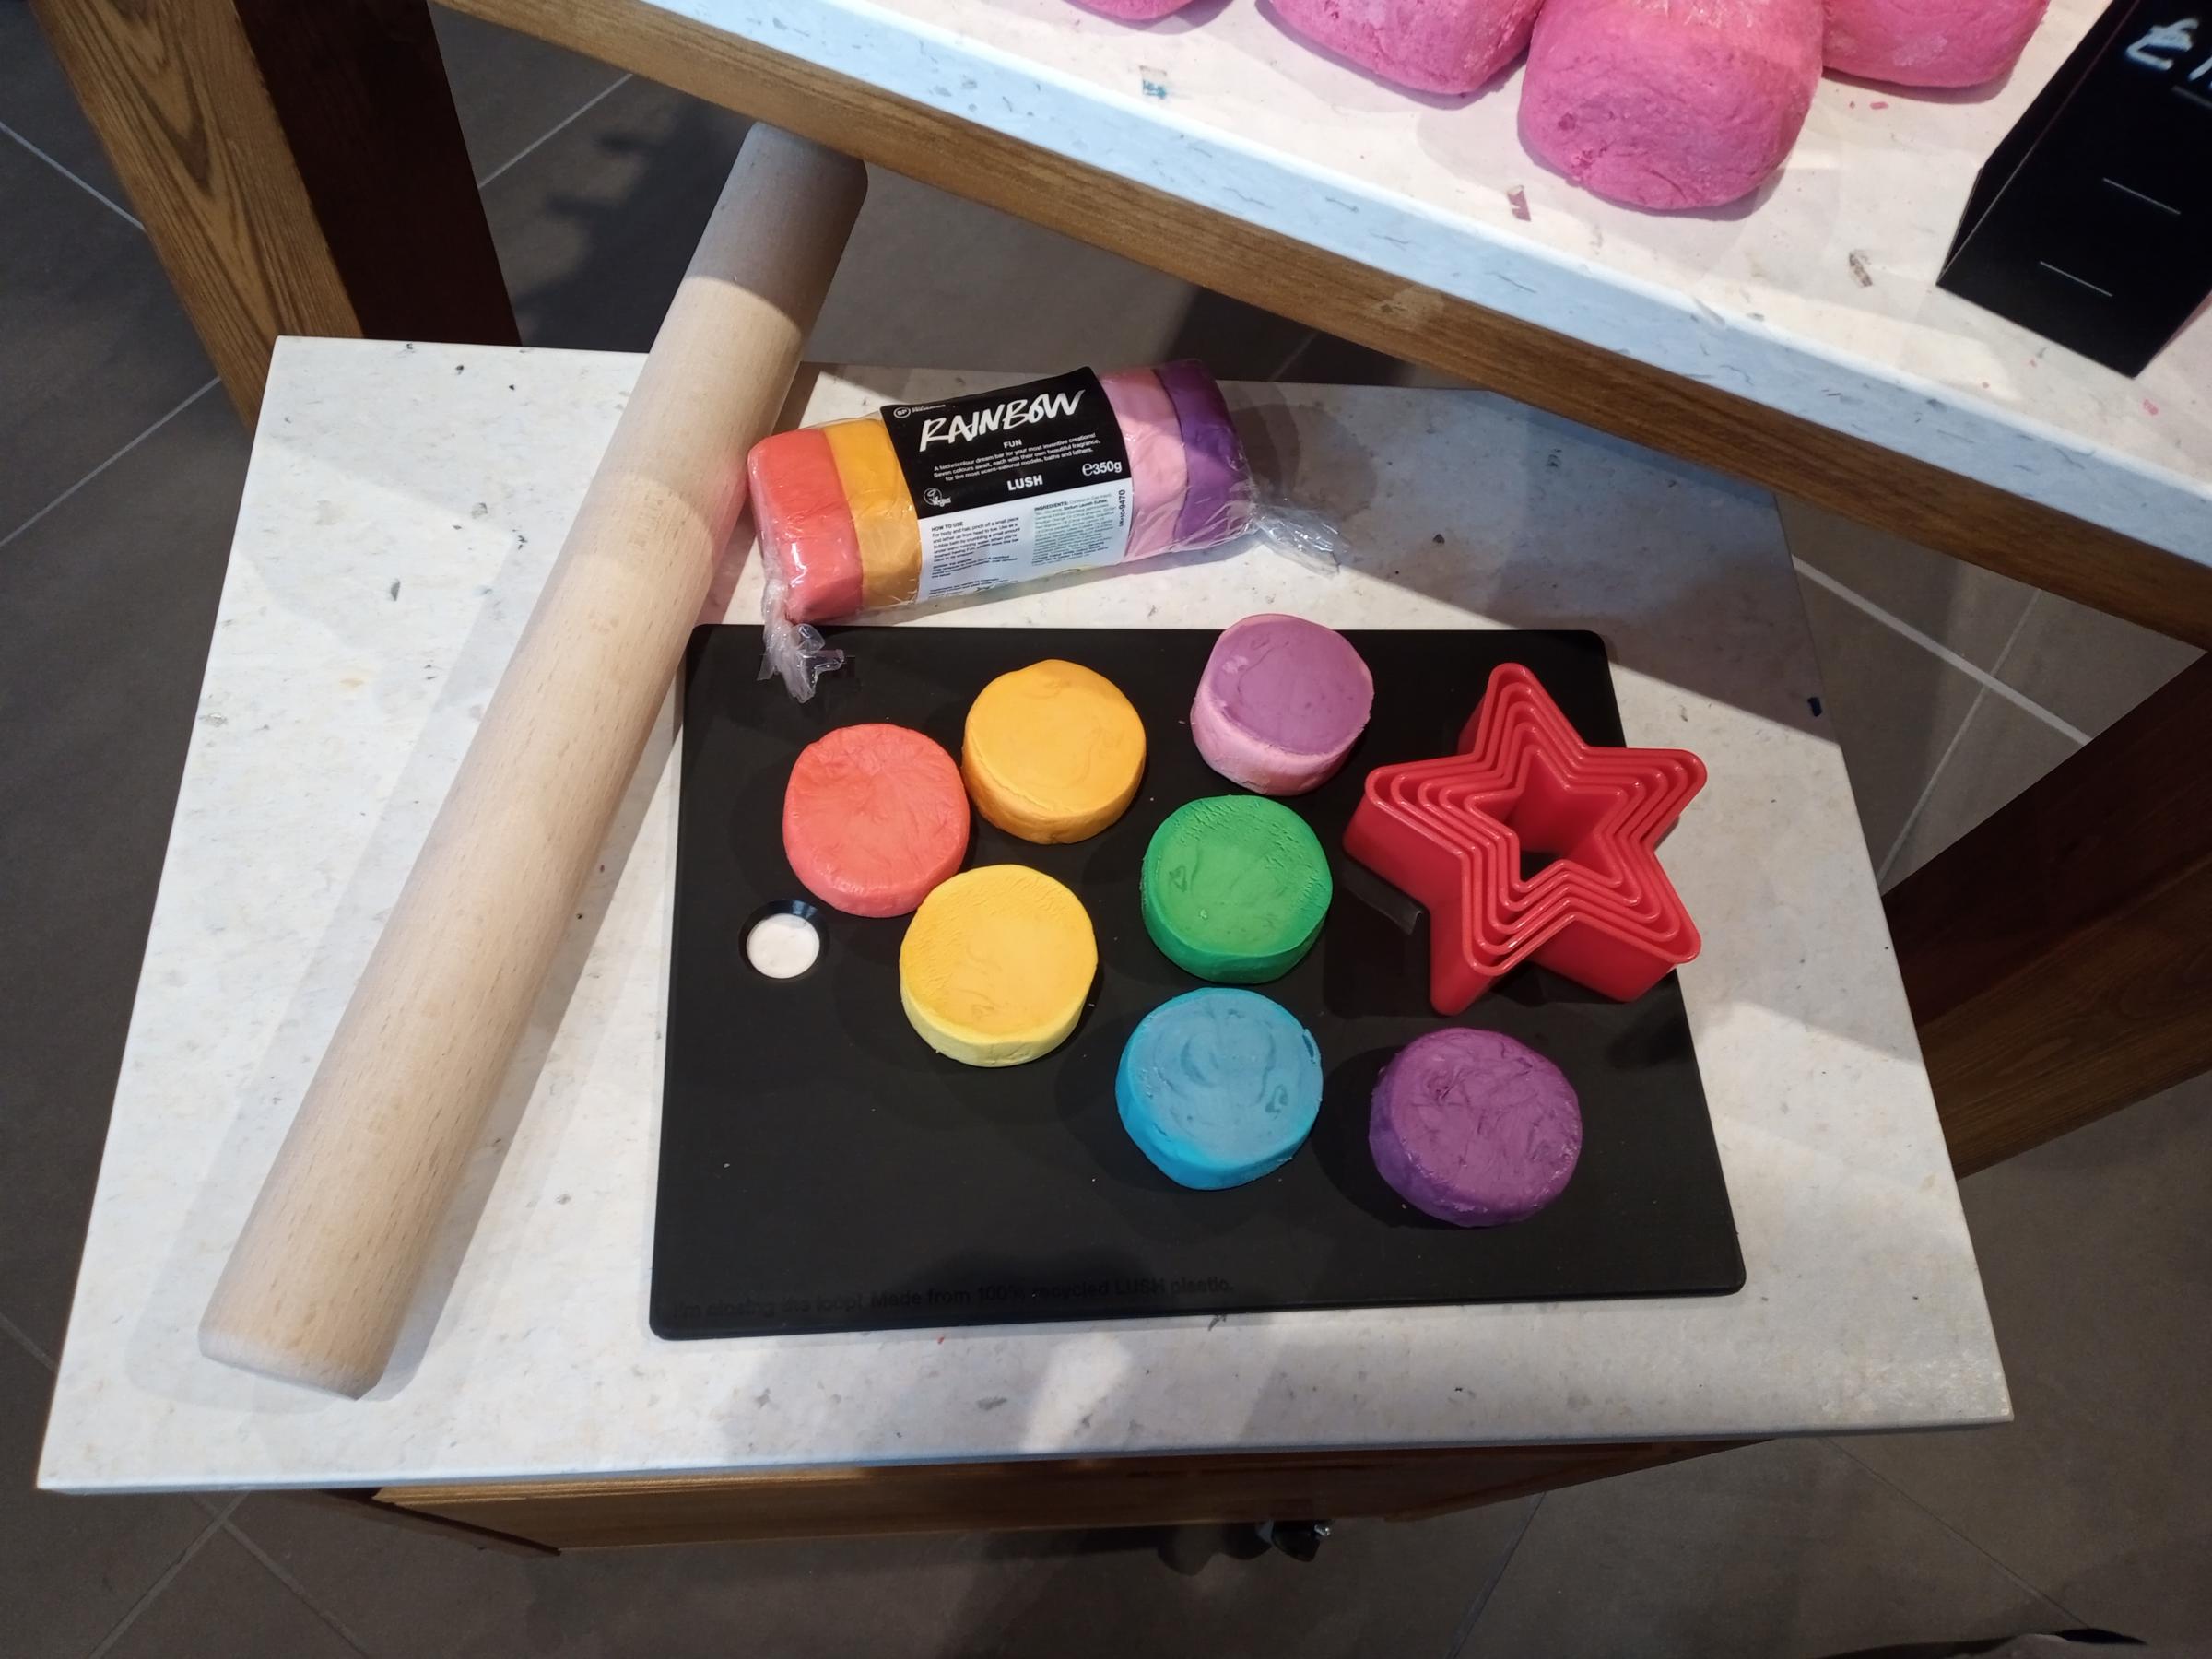 Lush products - where fun meets practical.